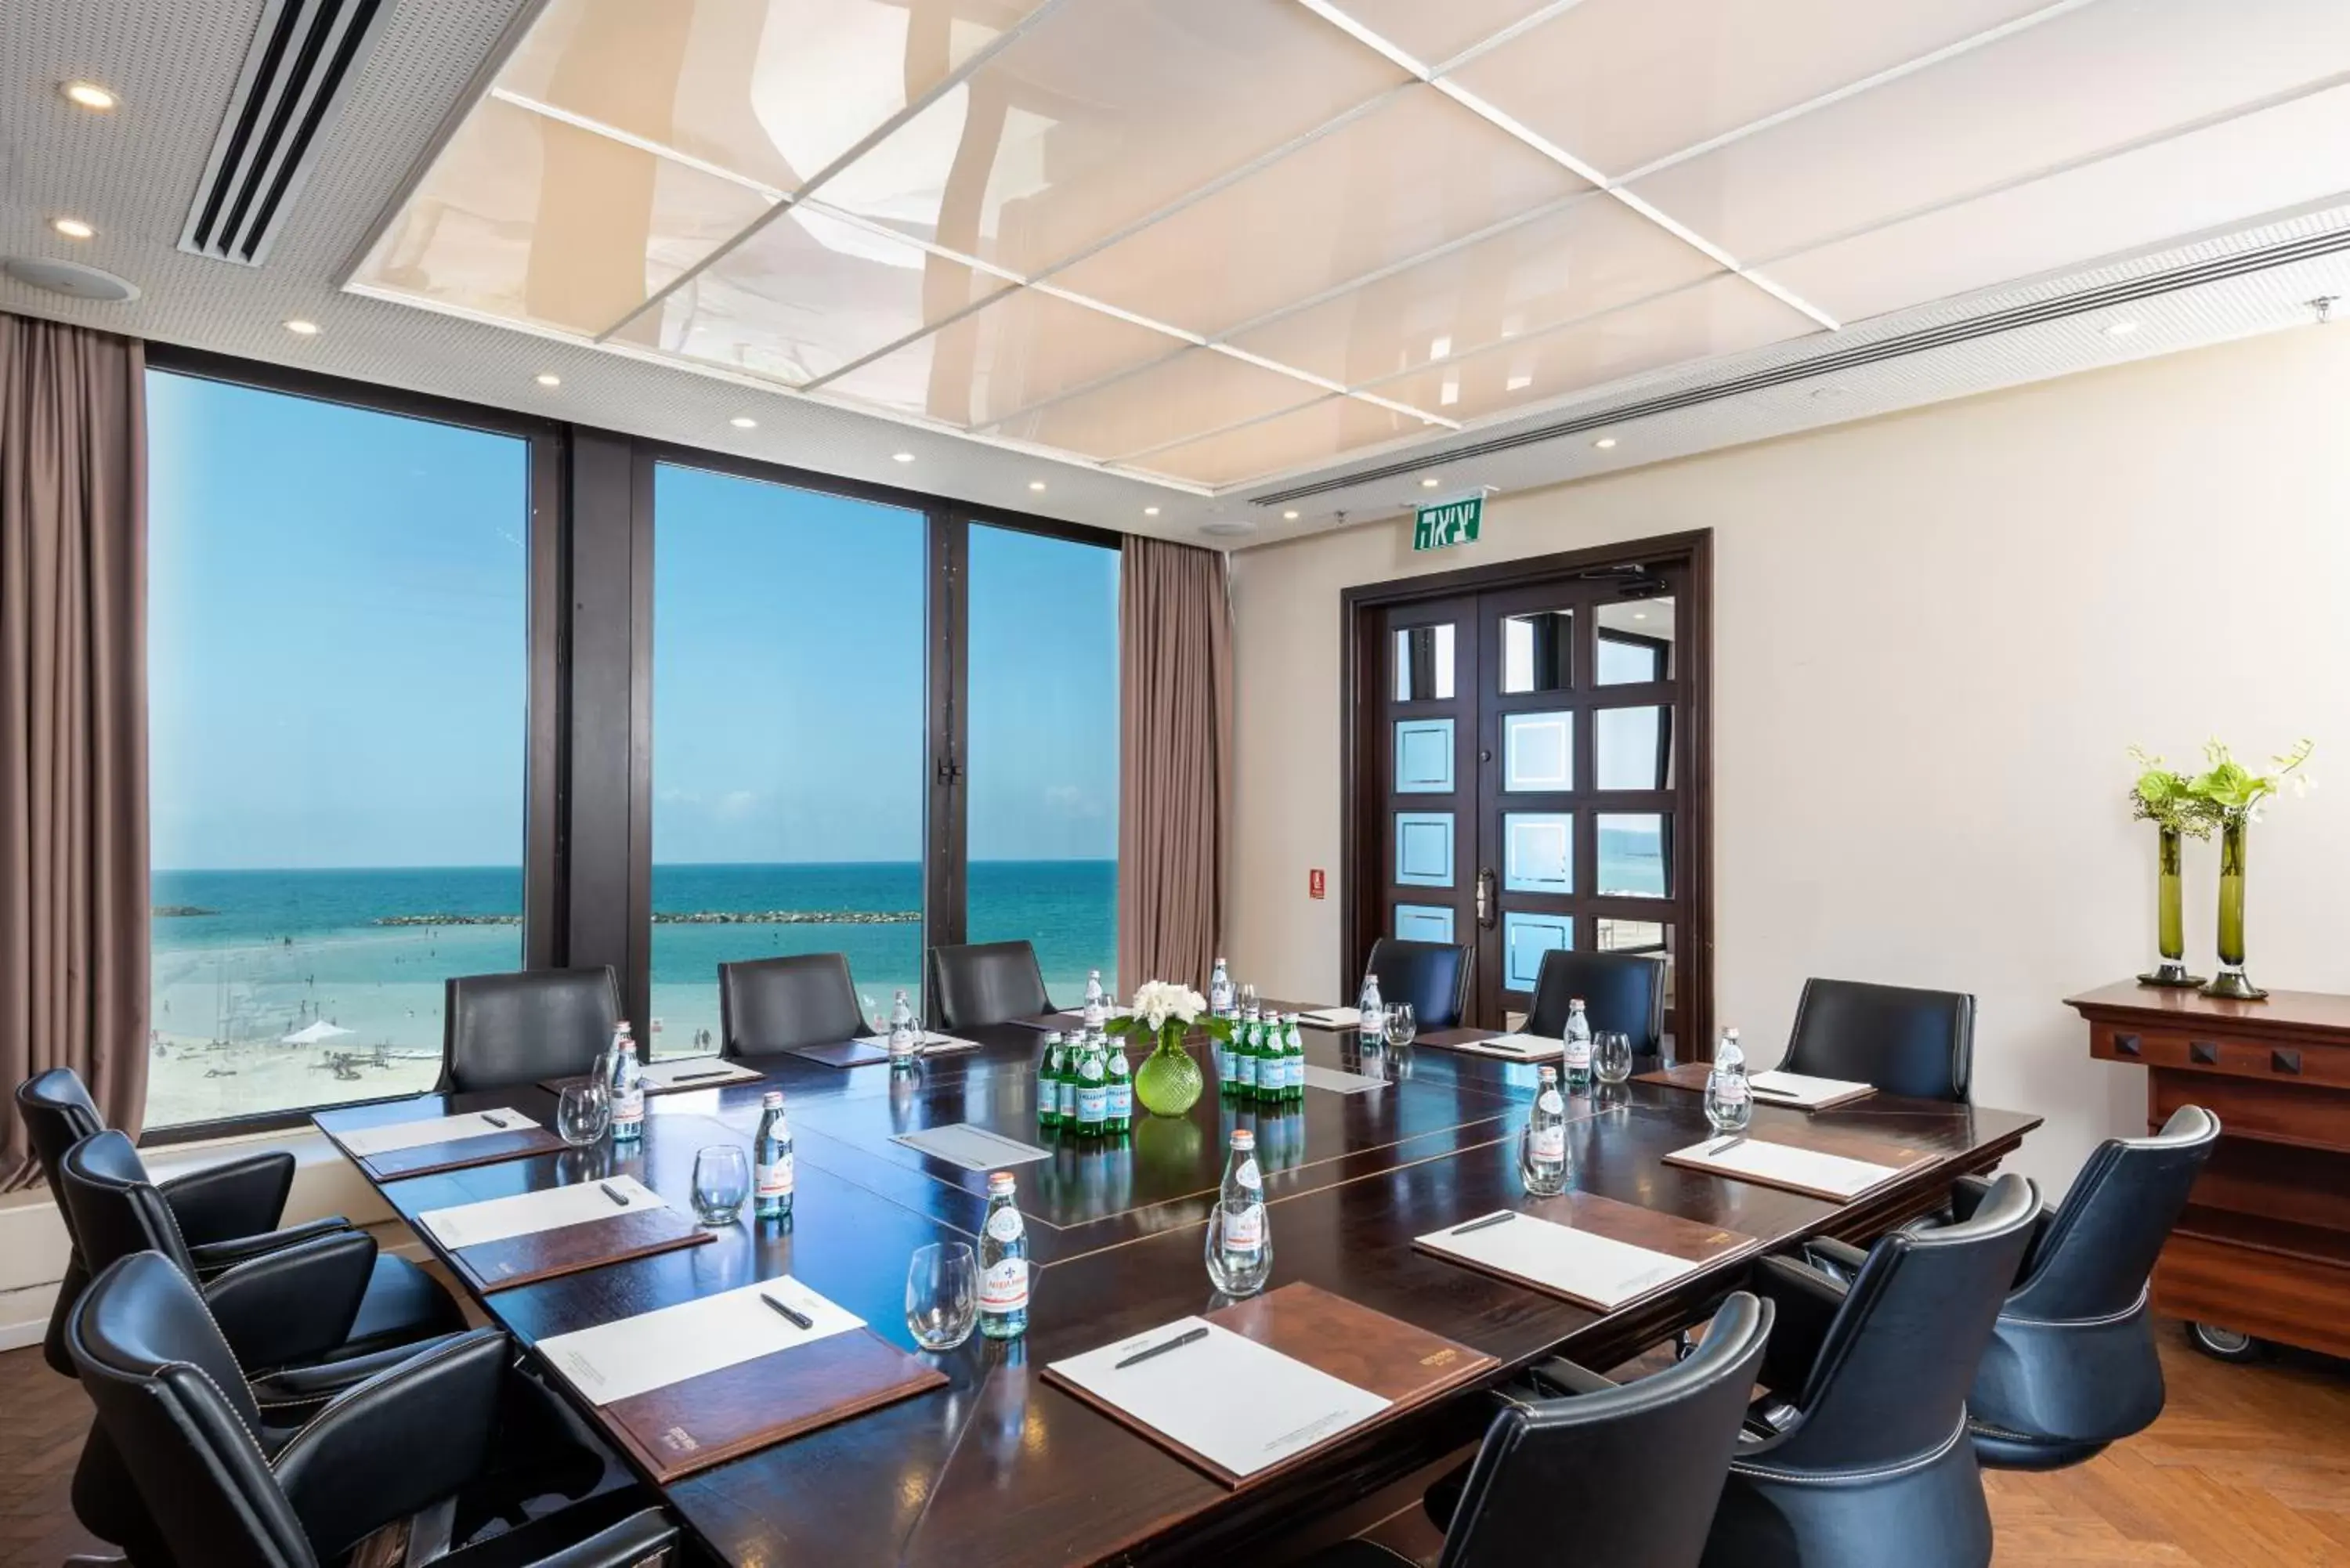 Meeting/conference room in Herods Tel Aviv By The Beach